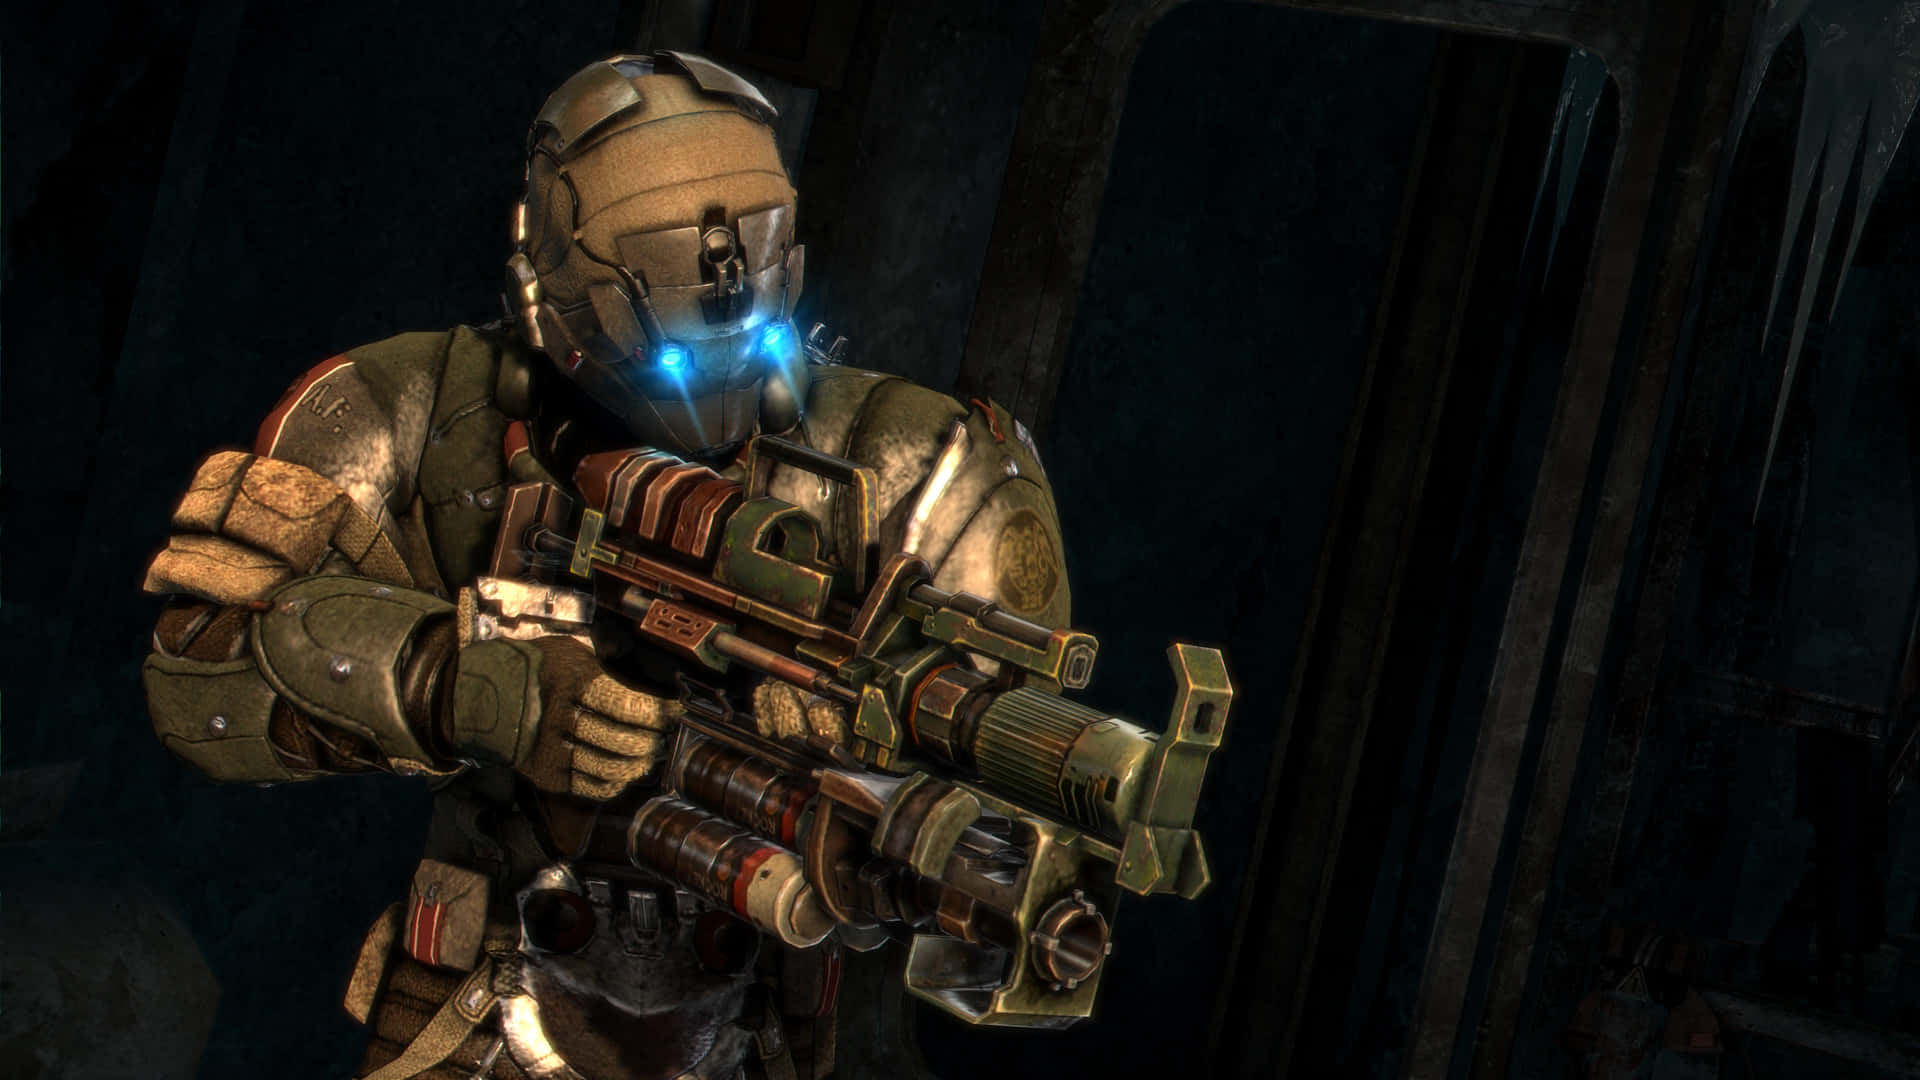 Enter the Dead Space world in 4K with this epic wallpaper Wallpaper